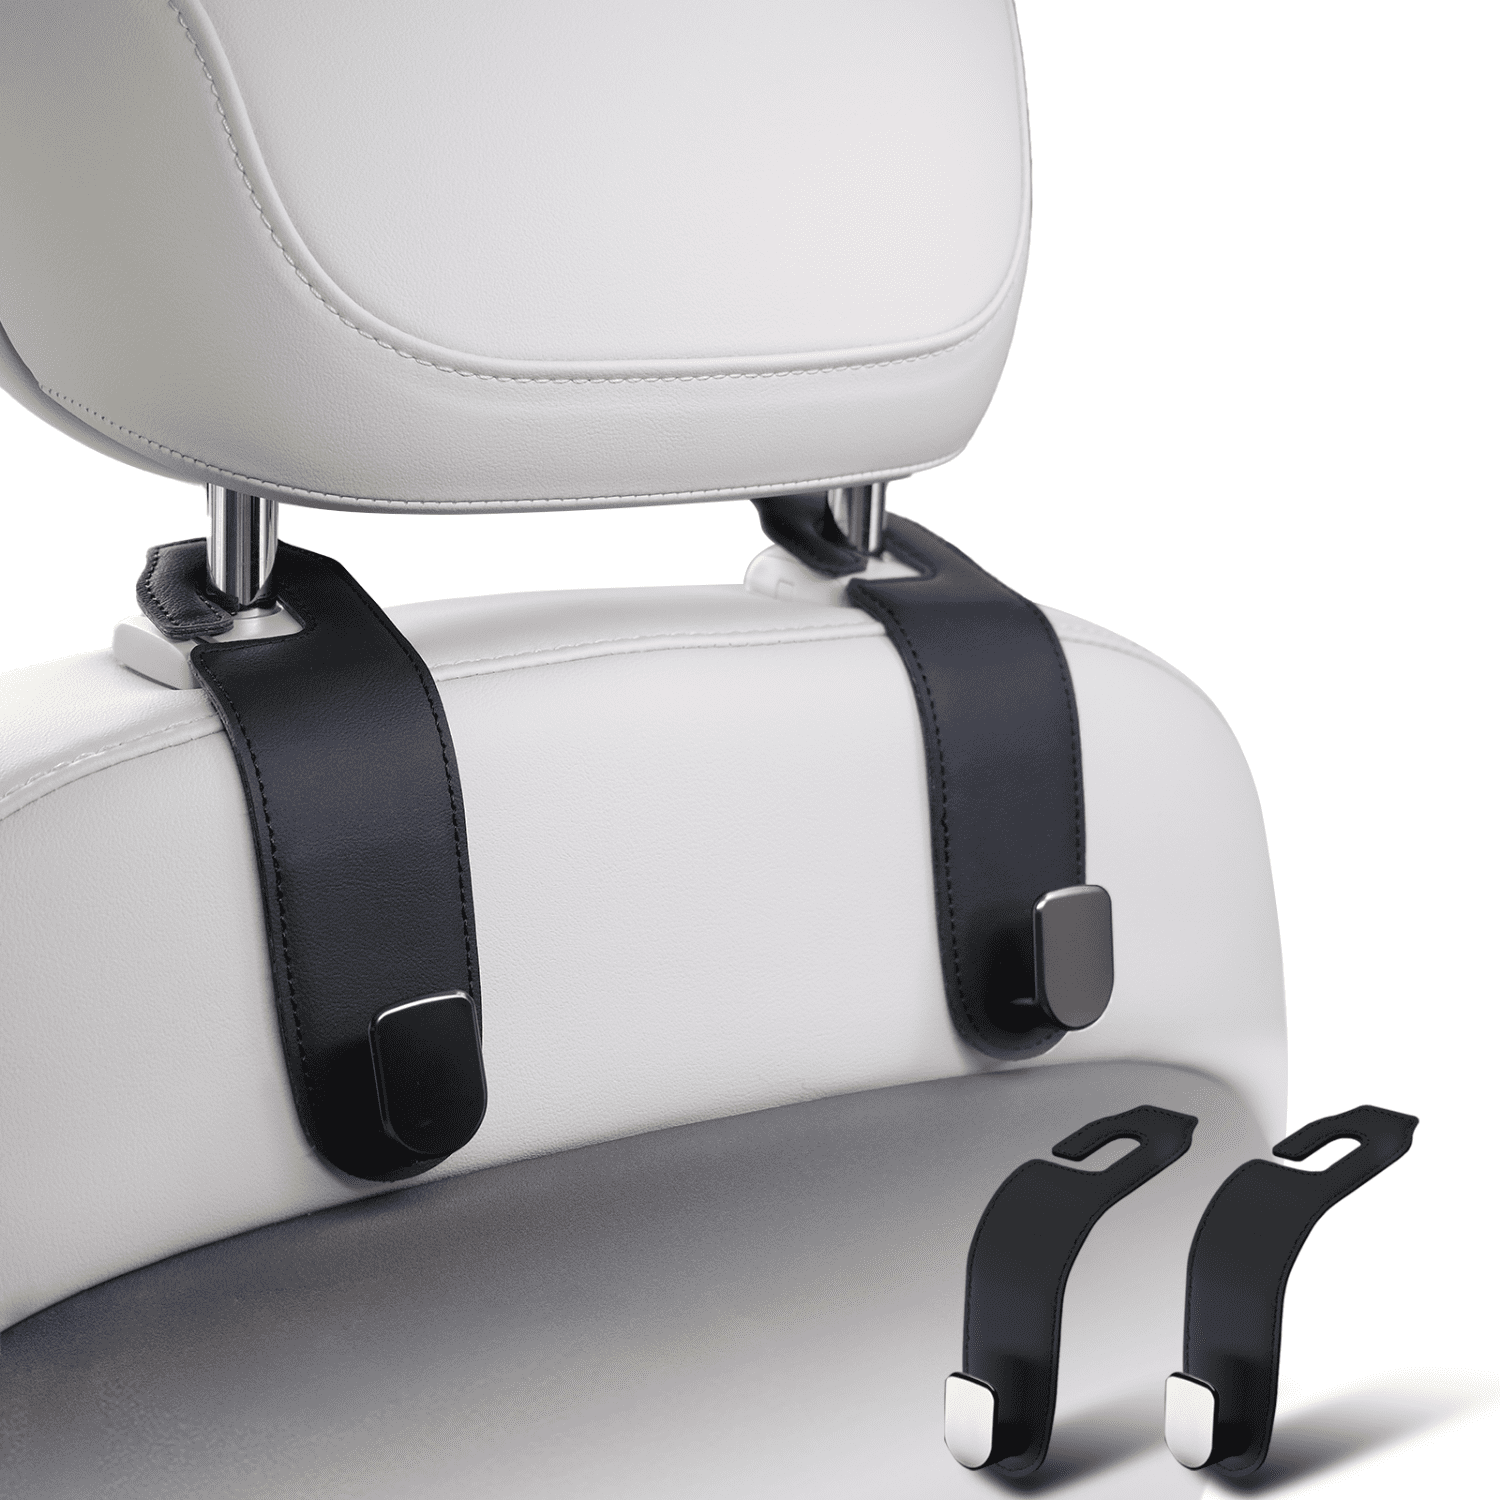 Auto Organizer Car Seat Headrest Hook: Durable Hooks For Back Seats,  Handbag Purse, Clothes, Coats Ideal For Storage And Organization. From  Fyautoper, $6.01